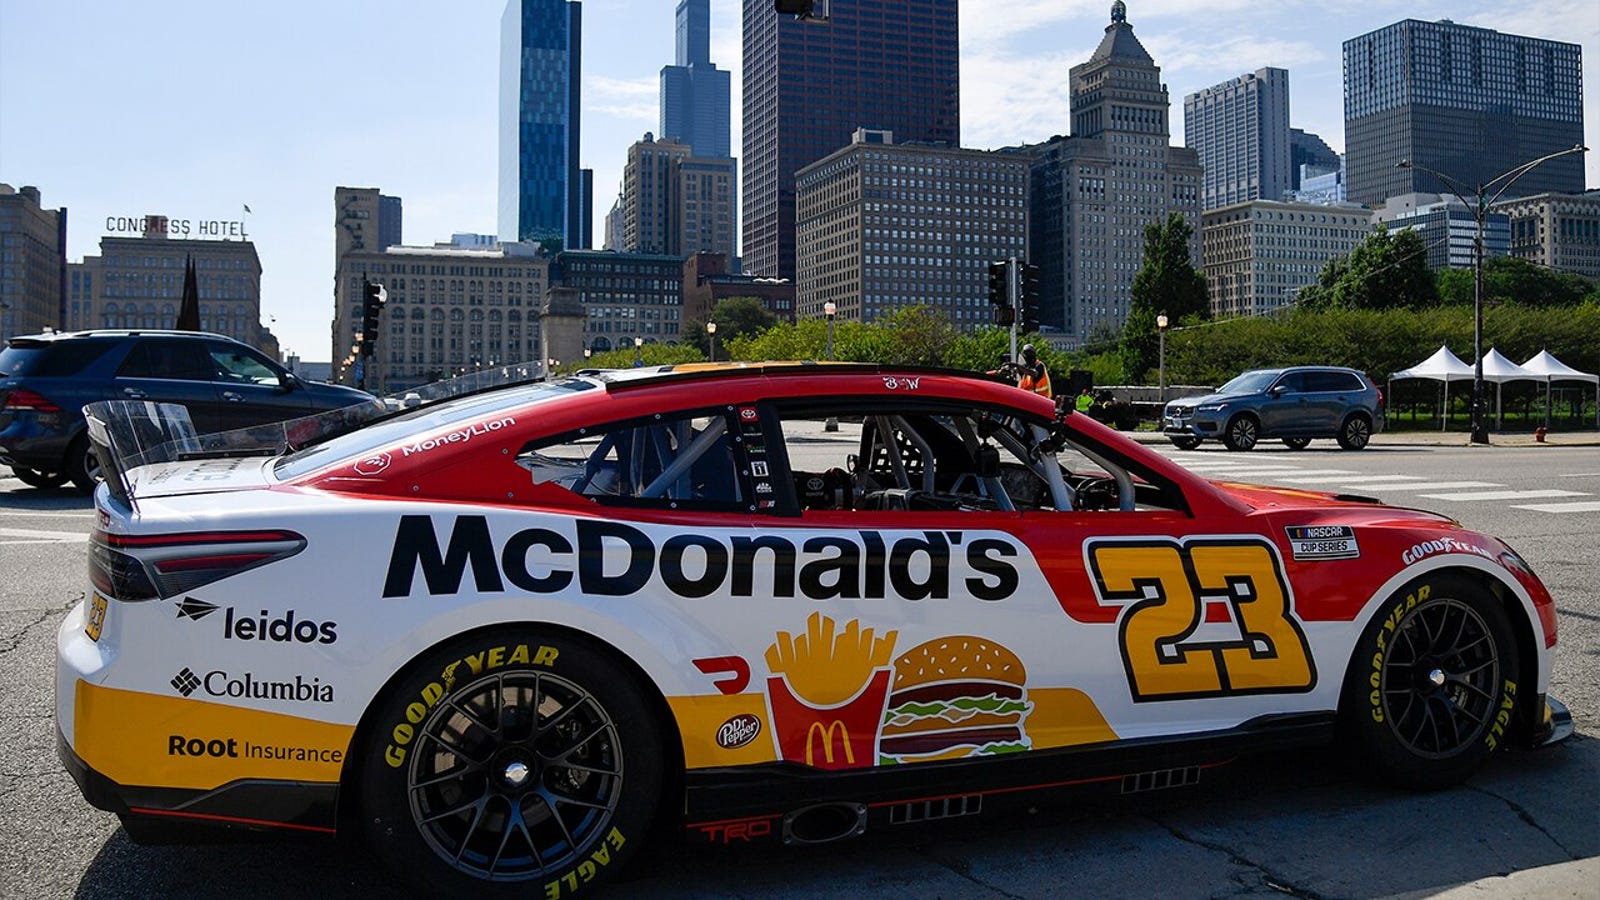 NASCAR announces first street course race in Chicago in 2023